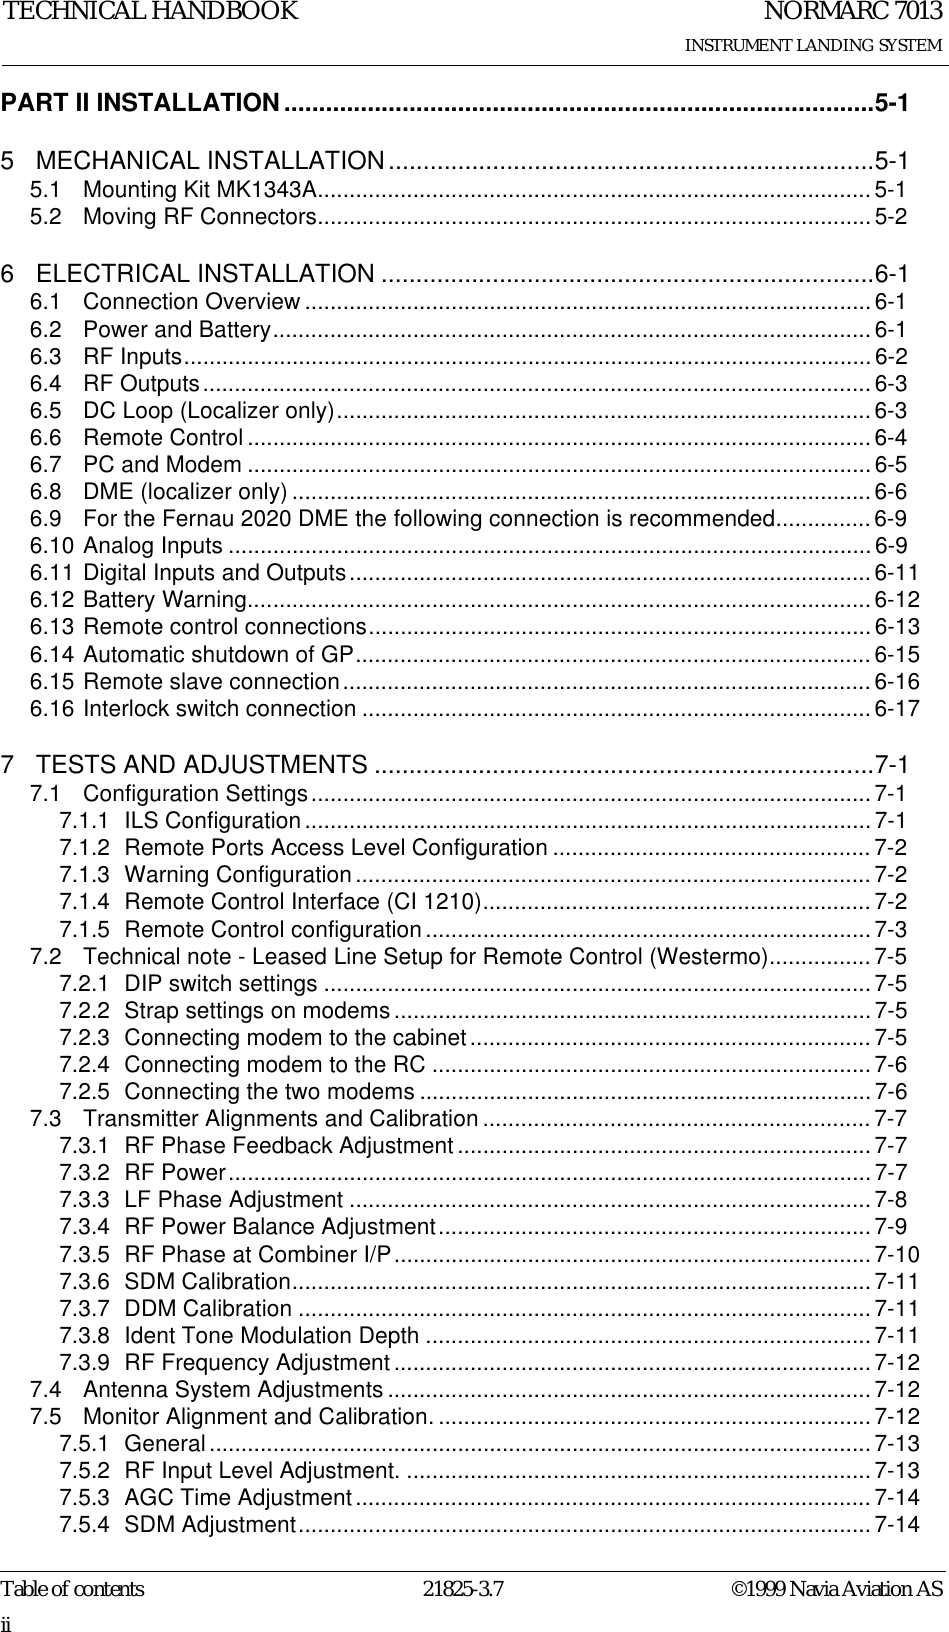 NORMARC 7013INSTRUMENT LANDING SYSTEMTECHNICAL HANDBOOKTable of contents 21825-3.7 ©1999 Navia Aviation ASiiPART II INSTALLATION.....................................................................................5-15 MECHANICAL INSTALLATION......................................................................5-15.1 Mounting Kit MK1343A.......................................................................................5-15.2 Moving RF Connectors.......................................................................................5-26 ELECTRICAL INSTALLATION .......................................................................6-16.1 Connection Overview .........................................................................................6-16.2 Power and Battery.............................................................................................. 6-16.3 RF Inputs............................................................................................................6-26.4 RF Outputs......................................................................................................... 6-36.5 DC Loop (Localizer only).................................................................................... 6-36.6 Remote Control .................................................................................................. 6-46.7 PC and Modem ..................................................................................................6-56.8 DME (localizer only) ........................................................................................... 6-66.9 For the Fernau 2020 DME the following connection is recommended...............6-96.10 Analog Inputs .....................................................................................................6-96.11 Digital Inputs and Outputs..................................................................................6-116.12 Battery Warning.................................................................................................. 6-126.13 Remote control connections...............................................................................6-136.14 Automatic shutdown of GP................................................................................. 6-156.15 Remote slave connection................................................................................... 6-166.16 Interlock switch connection ................................................................................6-177 TESTS AND ADJUSTMENTS ........................................................................7-17.1 Configuration Settings........................................................................................ 7-17.1.1 ILS Configuration.........................................................................................7-17.1.2 Remote Ports Access Level Configuration .................................................. 7-27.1.3 Warning Configuration ................................................................................. 7-27.1.4 Remote Control Interface (CI 1210)............................................................. 7-27.1.5 Remote Control configuration ...................................................................... 7-37.2 Technical note - Leased Line Setup for Remote Control (Westermo)................7-57.2.1 DIP switch settings ...................................................................................... 7-57.2.2 Strap settings on modems...........................................................................7-57.2.3 Connecting modem to the cabinet...............................................................7-57.2.4 Connecting modem to the RC .....................................................................7-67.2.5 Connecting the two modems .......................................................................7-67.3 Transmitter Alignments and Calibration ............................................................. 7-77.3.1 RF Phase Feedback Adjustment.................................................................7-77.3.2 RF Power..................................................................................................... 7-77.3.3 LF Phase Adjustment .................................................................................. 7-87.3.4 RF Power Balance Adjustment.................................................................... 7-97.3.5 RF Phase at Combiner I/P........................................................................... 7-107.3.6 SDM Calibration........................................................................................... 7-117.3.7 DDM Calibration .......................................................................................... 7-117.3.8 Ident Tone Modulation Depth ...................................................................... 7-117.3.9 RF Frequency Adjustment...........................................................................7-127.4 Antenna System Adjustments ............................................................................7-127.5 Monitor Alignment and Calibration.....................................................................7-127.5.1 General ........................................................................................................ 7-137.5.2 RF Input Level Adjustment. .........................................................................7-137.5.3 AGC Time Adjustment................................................................................. 7-147.5.4 SDM Adjustment.......................................................................................... 7-14